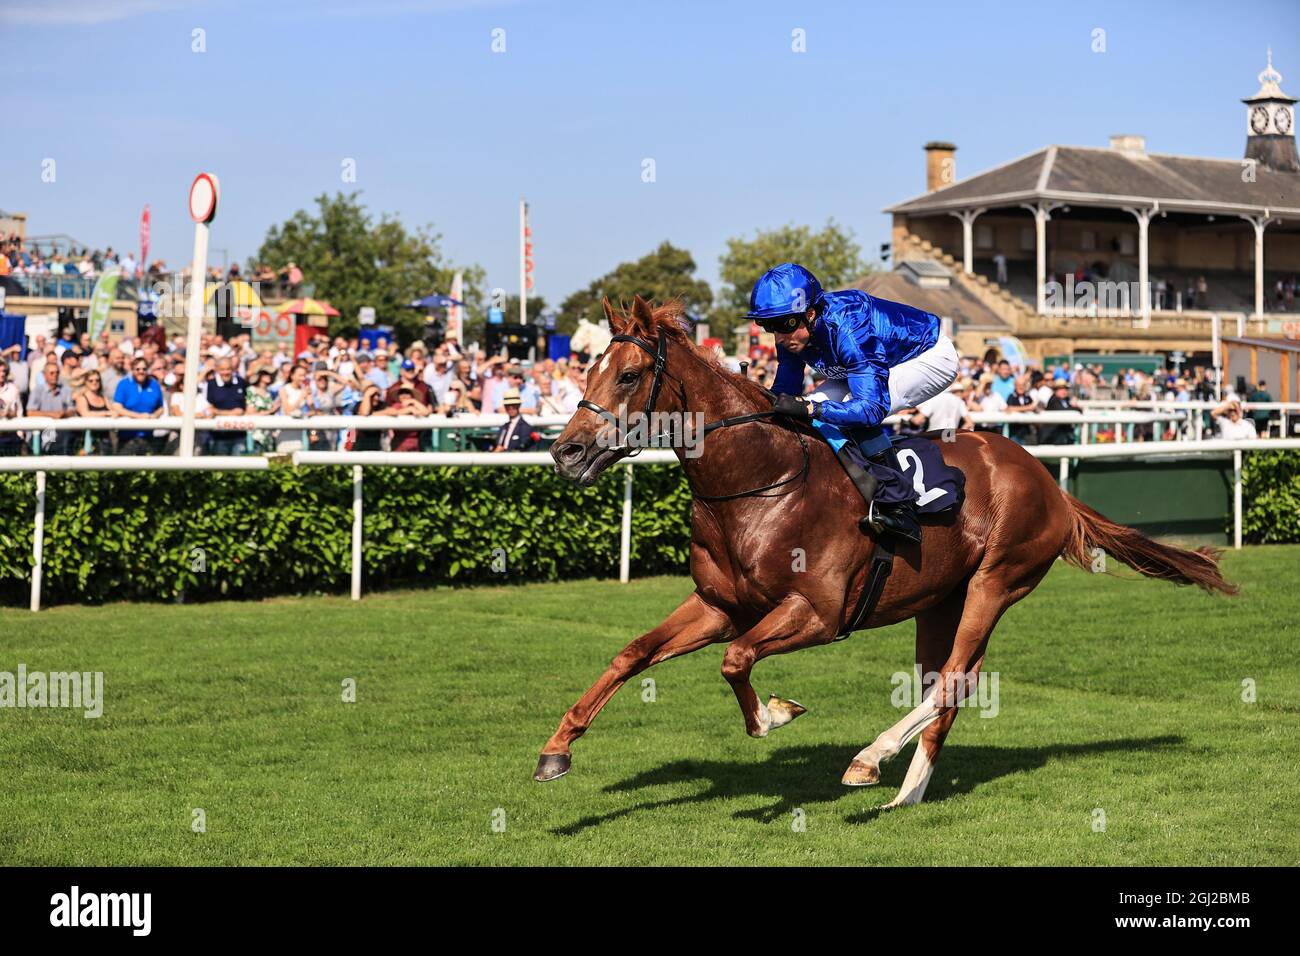 Modern Games indovined by William Buick vince le 13:45 Take the Reins Nursery a Doncaster Racecourse, Doncaster, South Yorkshire, UK, 08 09 2021 Foto Stock